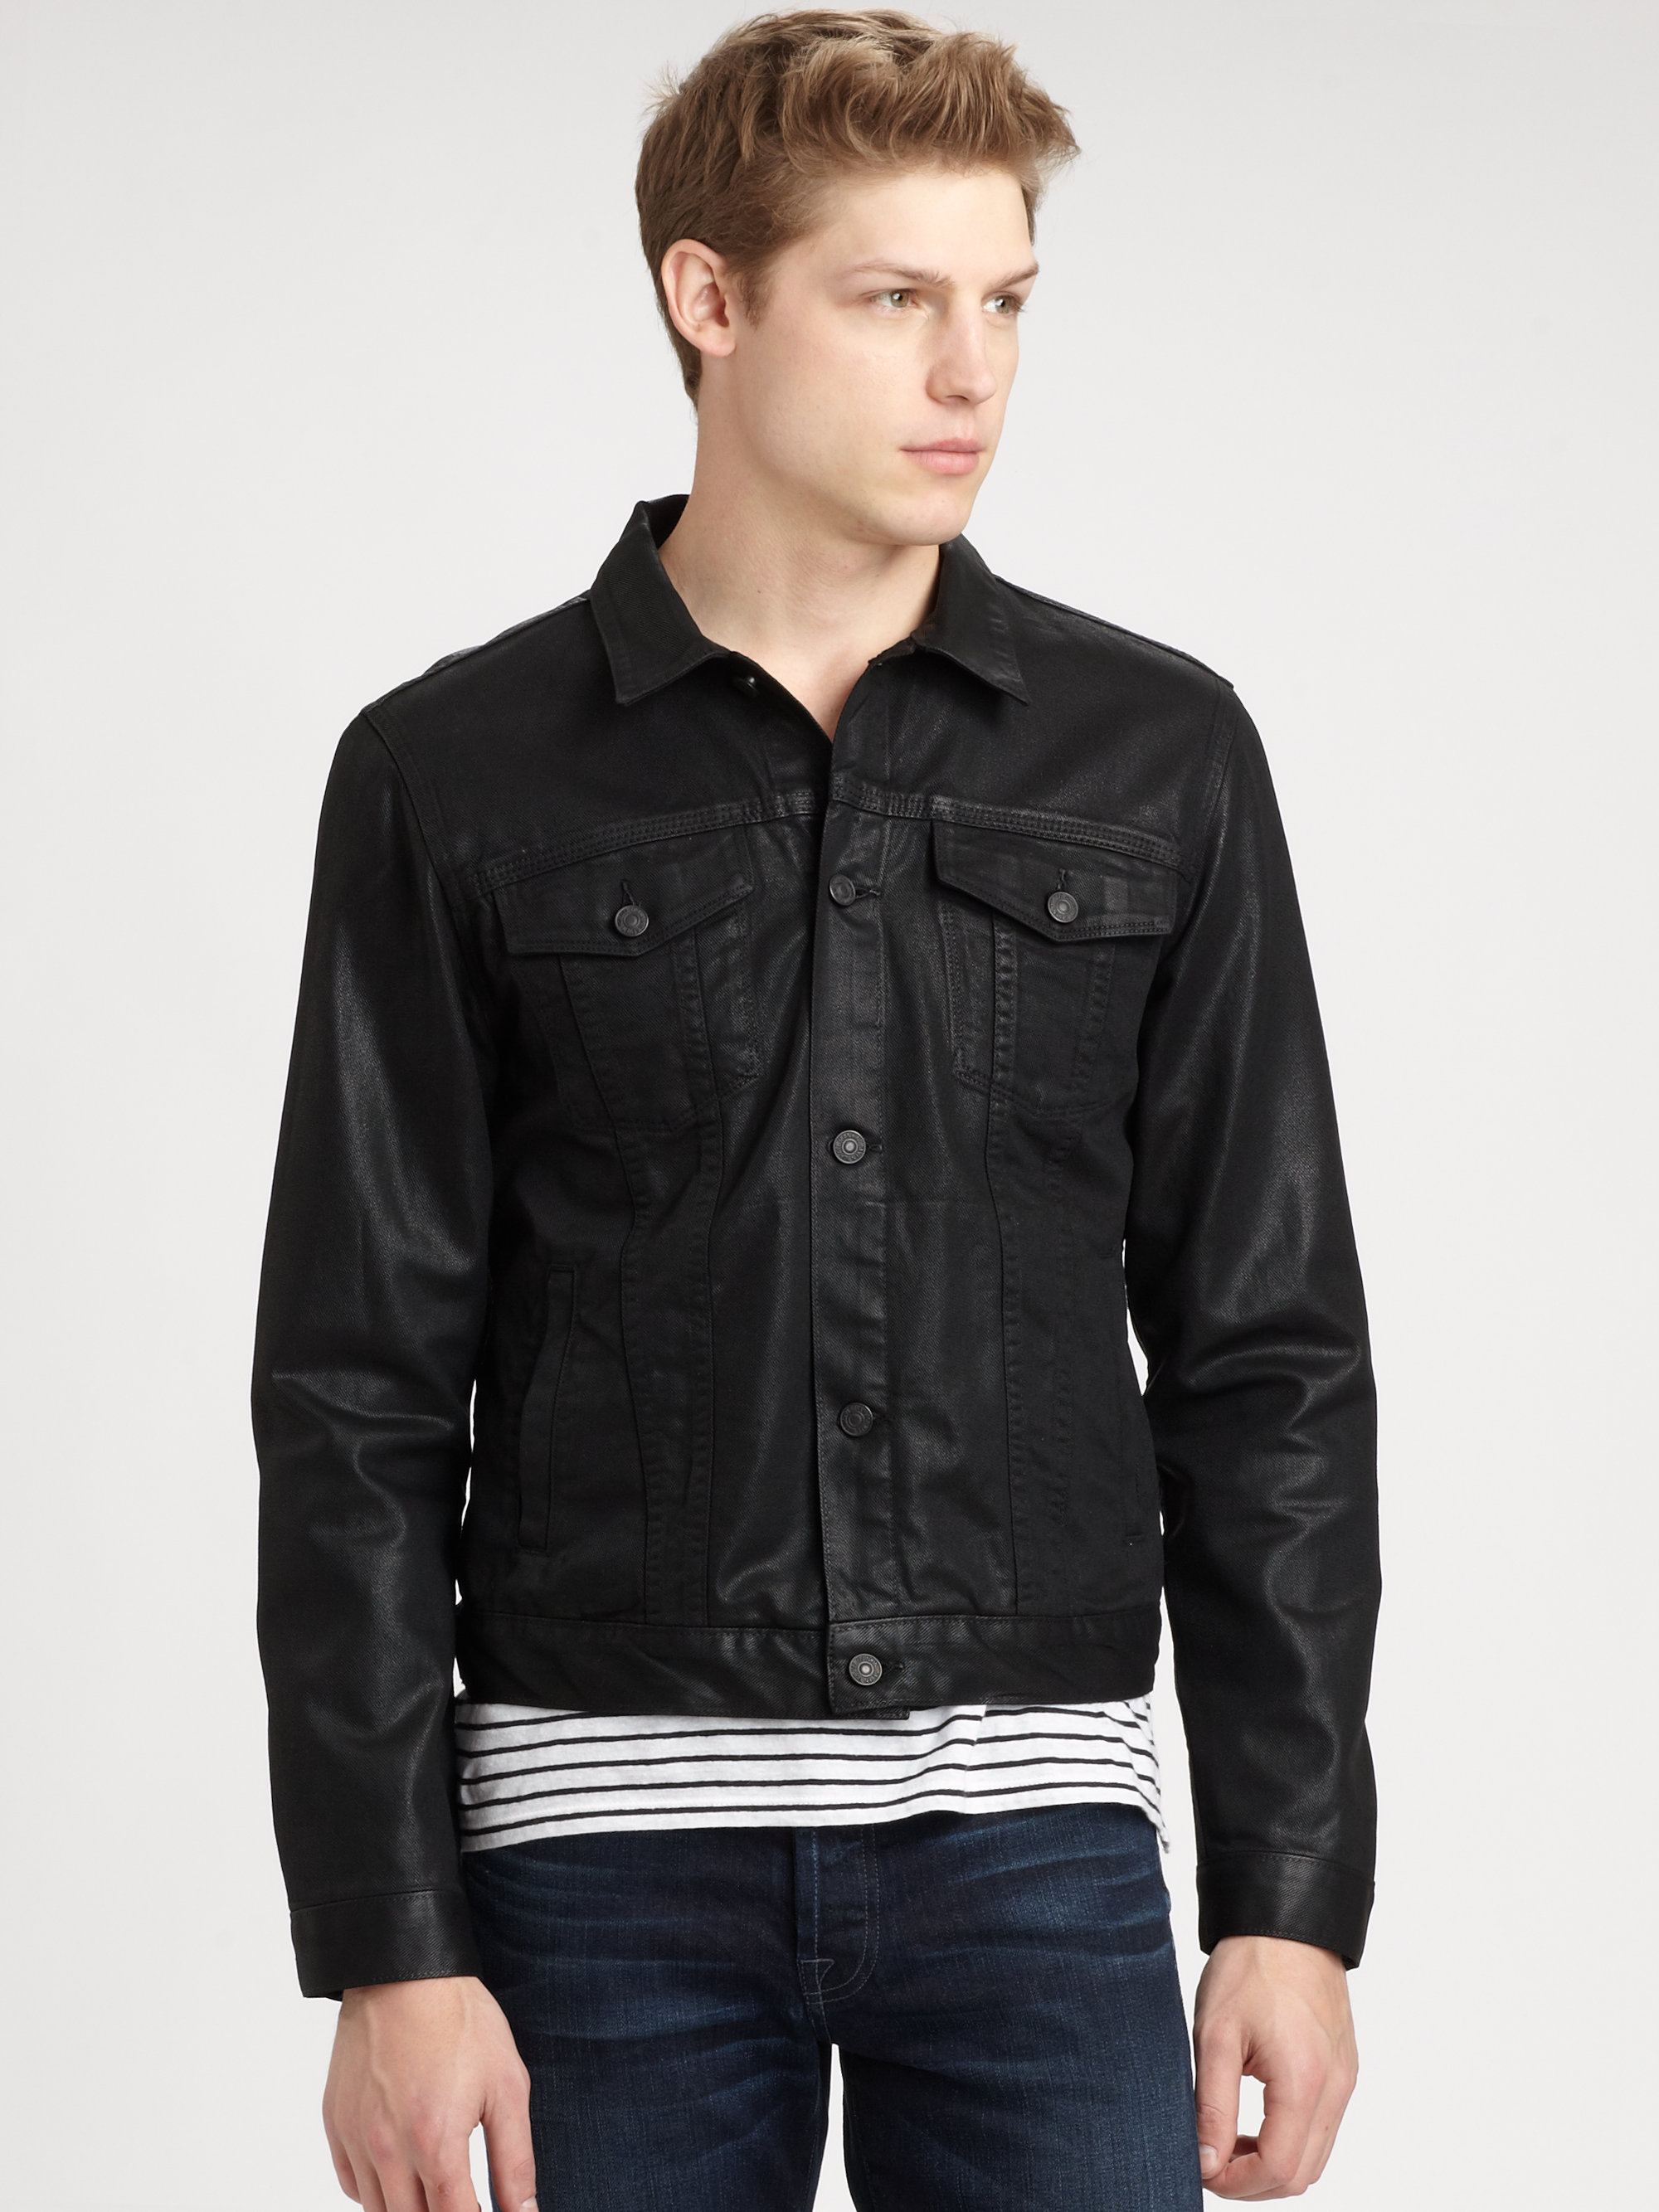 Lyst - 7 For All Mankind High Gloss Coated Denim Jacket in Black for Men